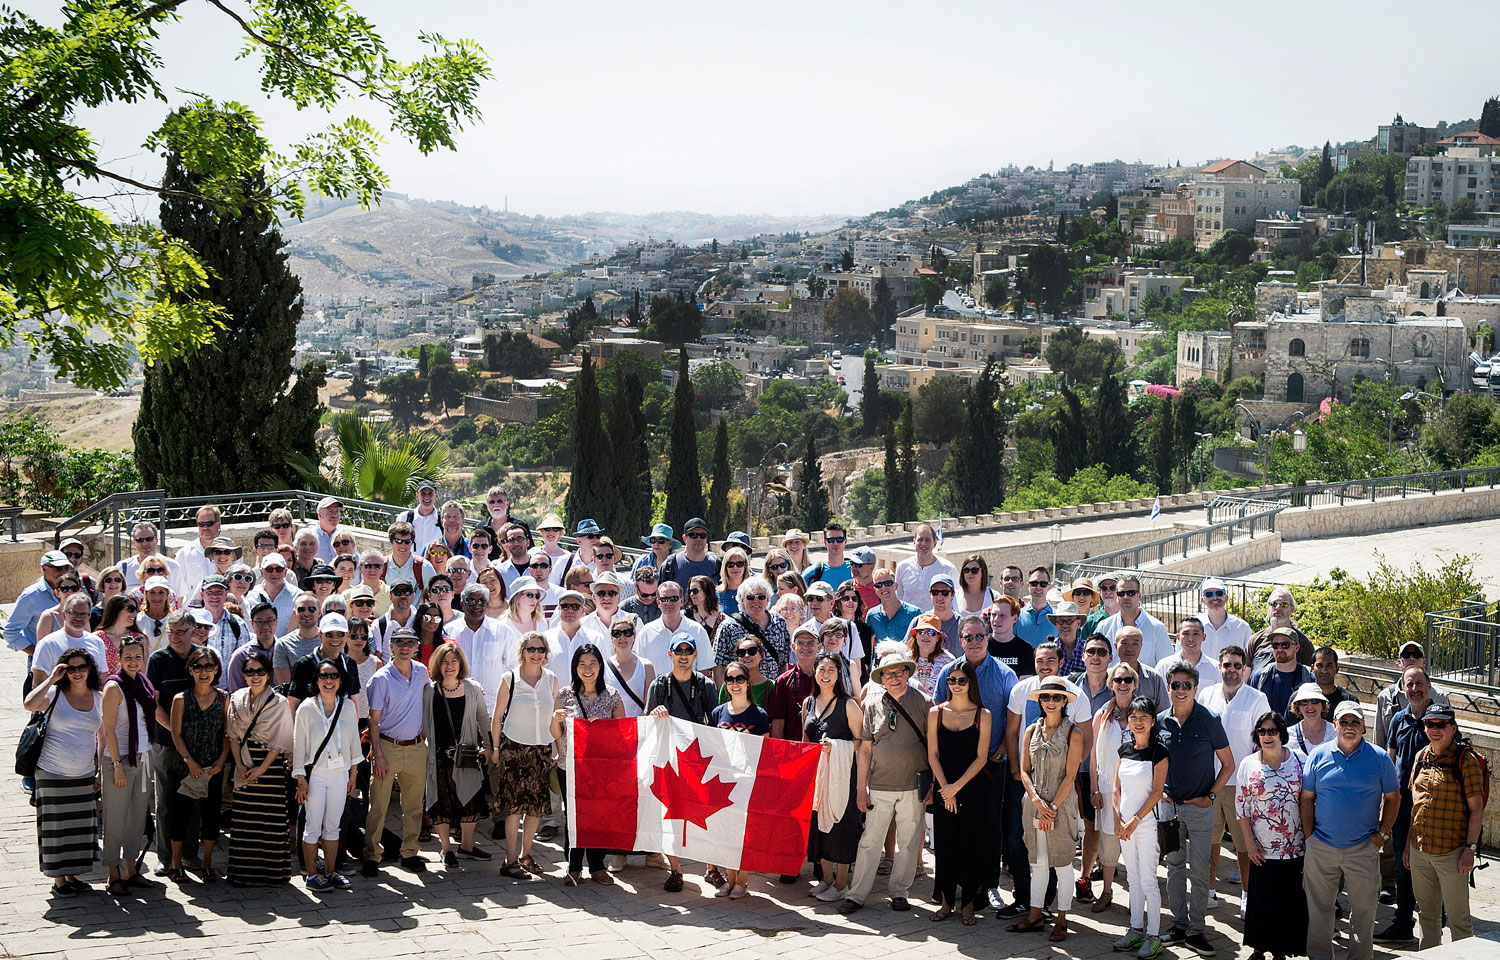 The Toronto Symphony Orchestra's tour in Jerusalem helps to build bridges in music from Canada to Israel.